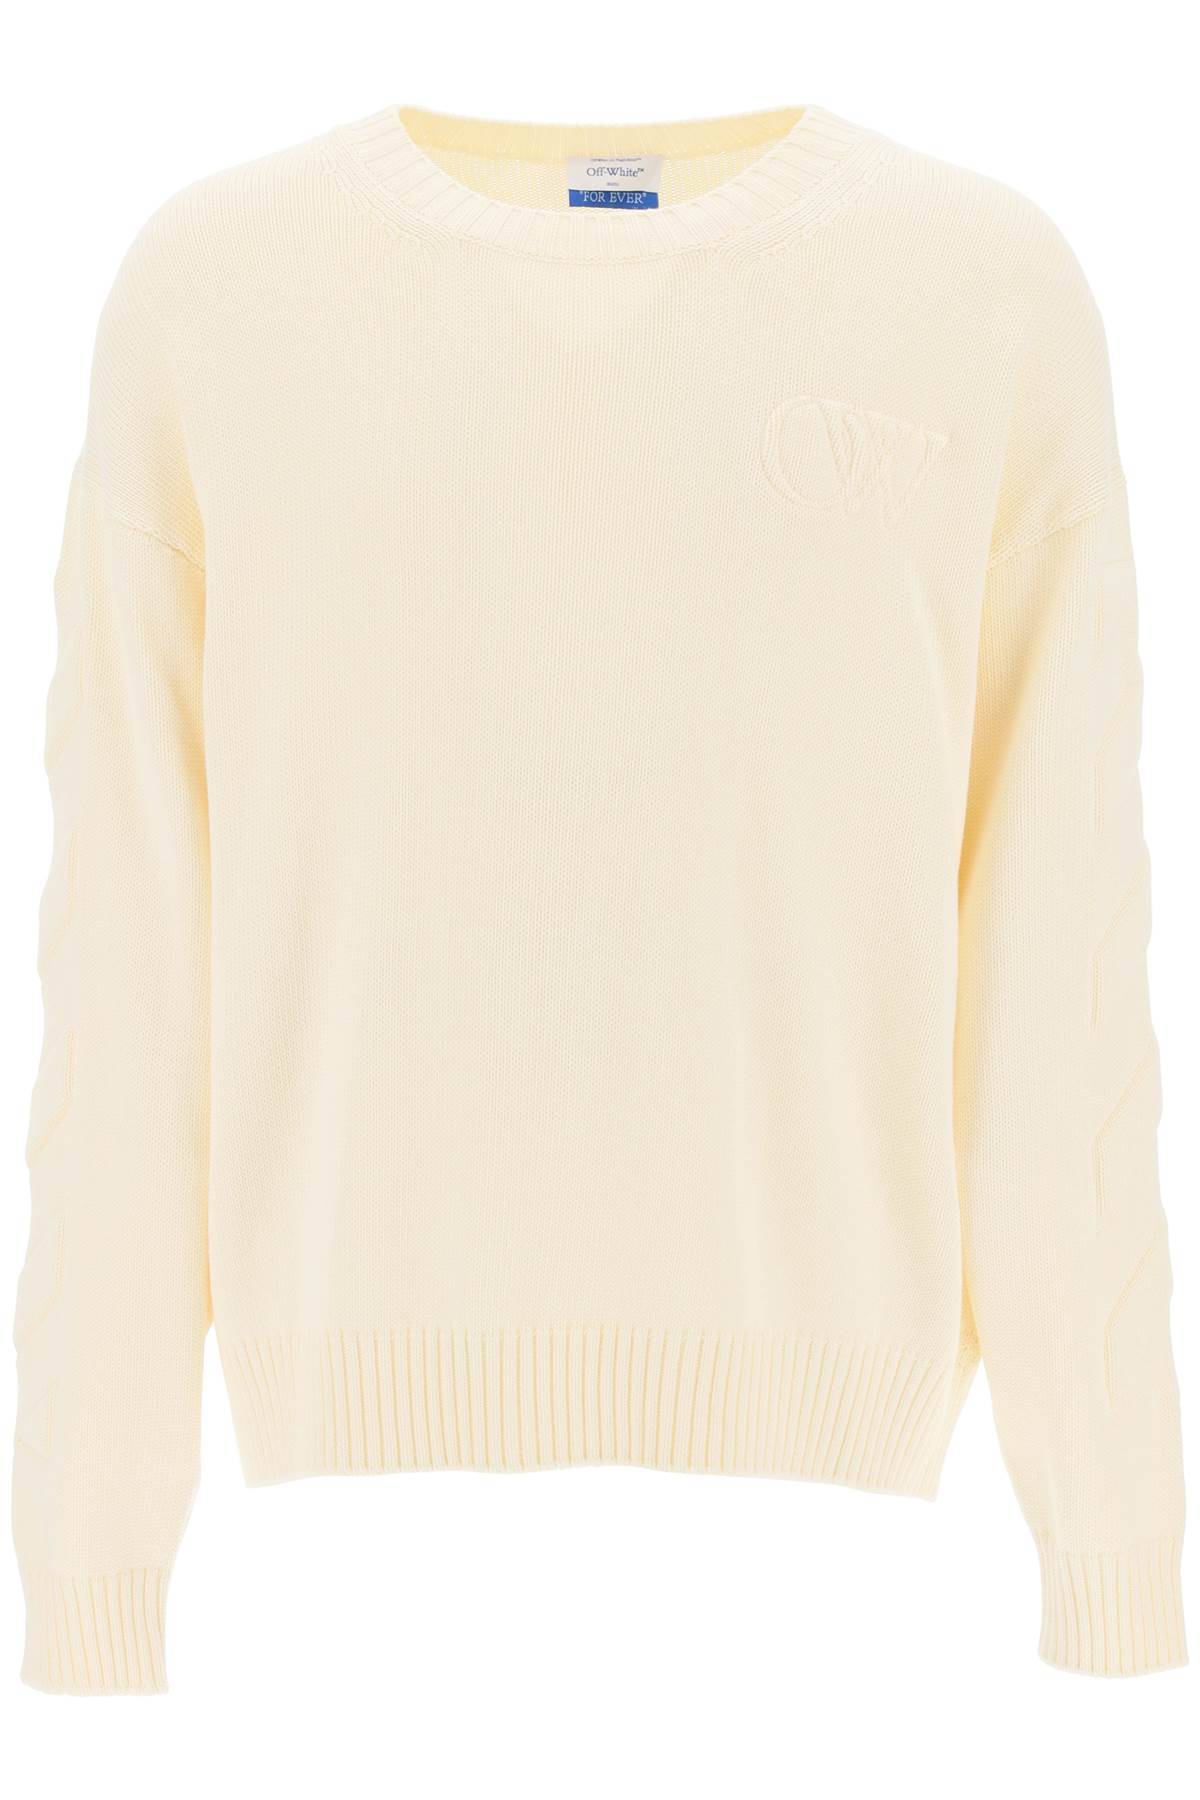 OFF-WHITE OFF-WHITE sweater with embossed diagonal motif